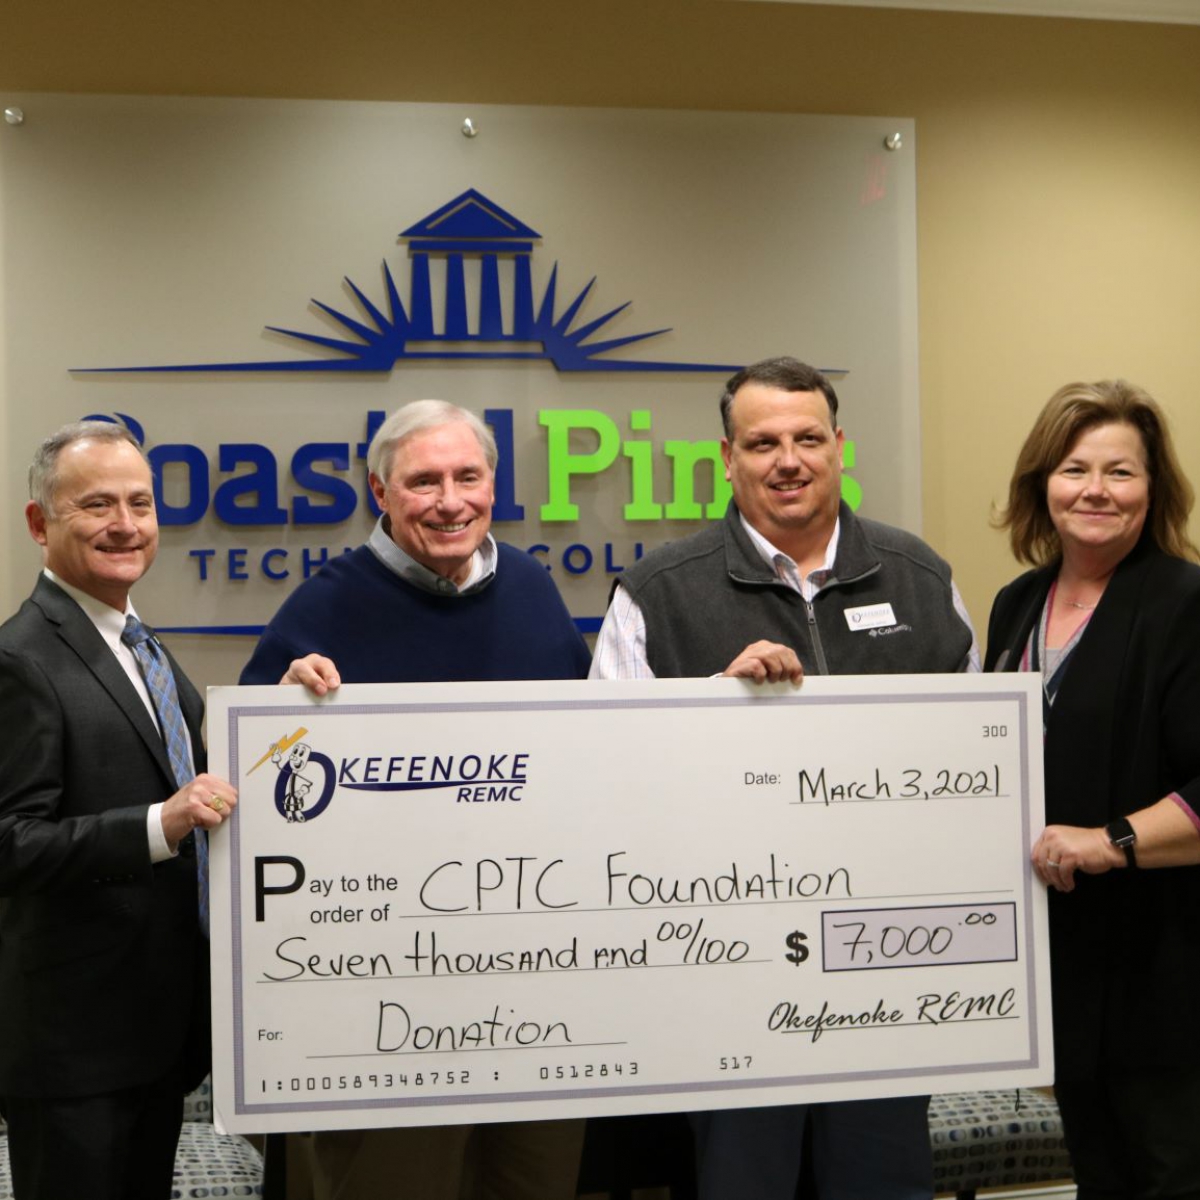 CPTC Donation an Investment in the Future